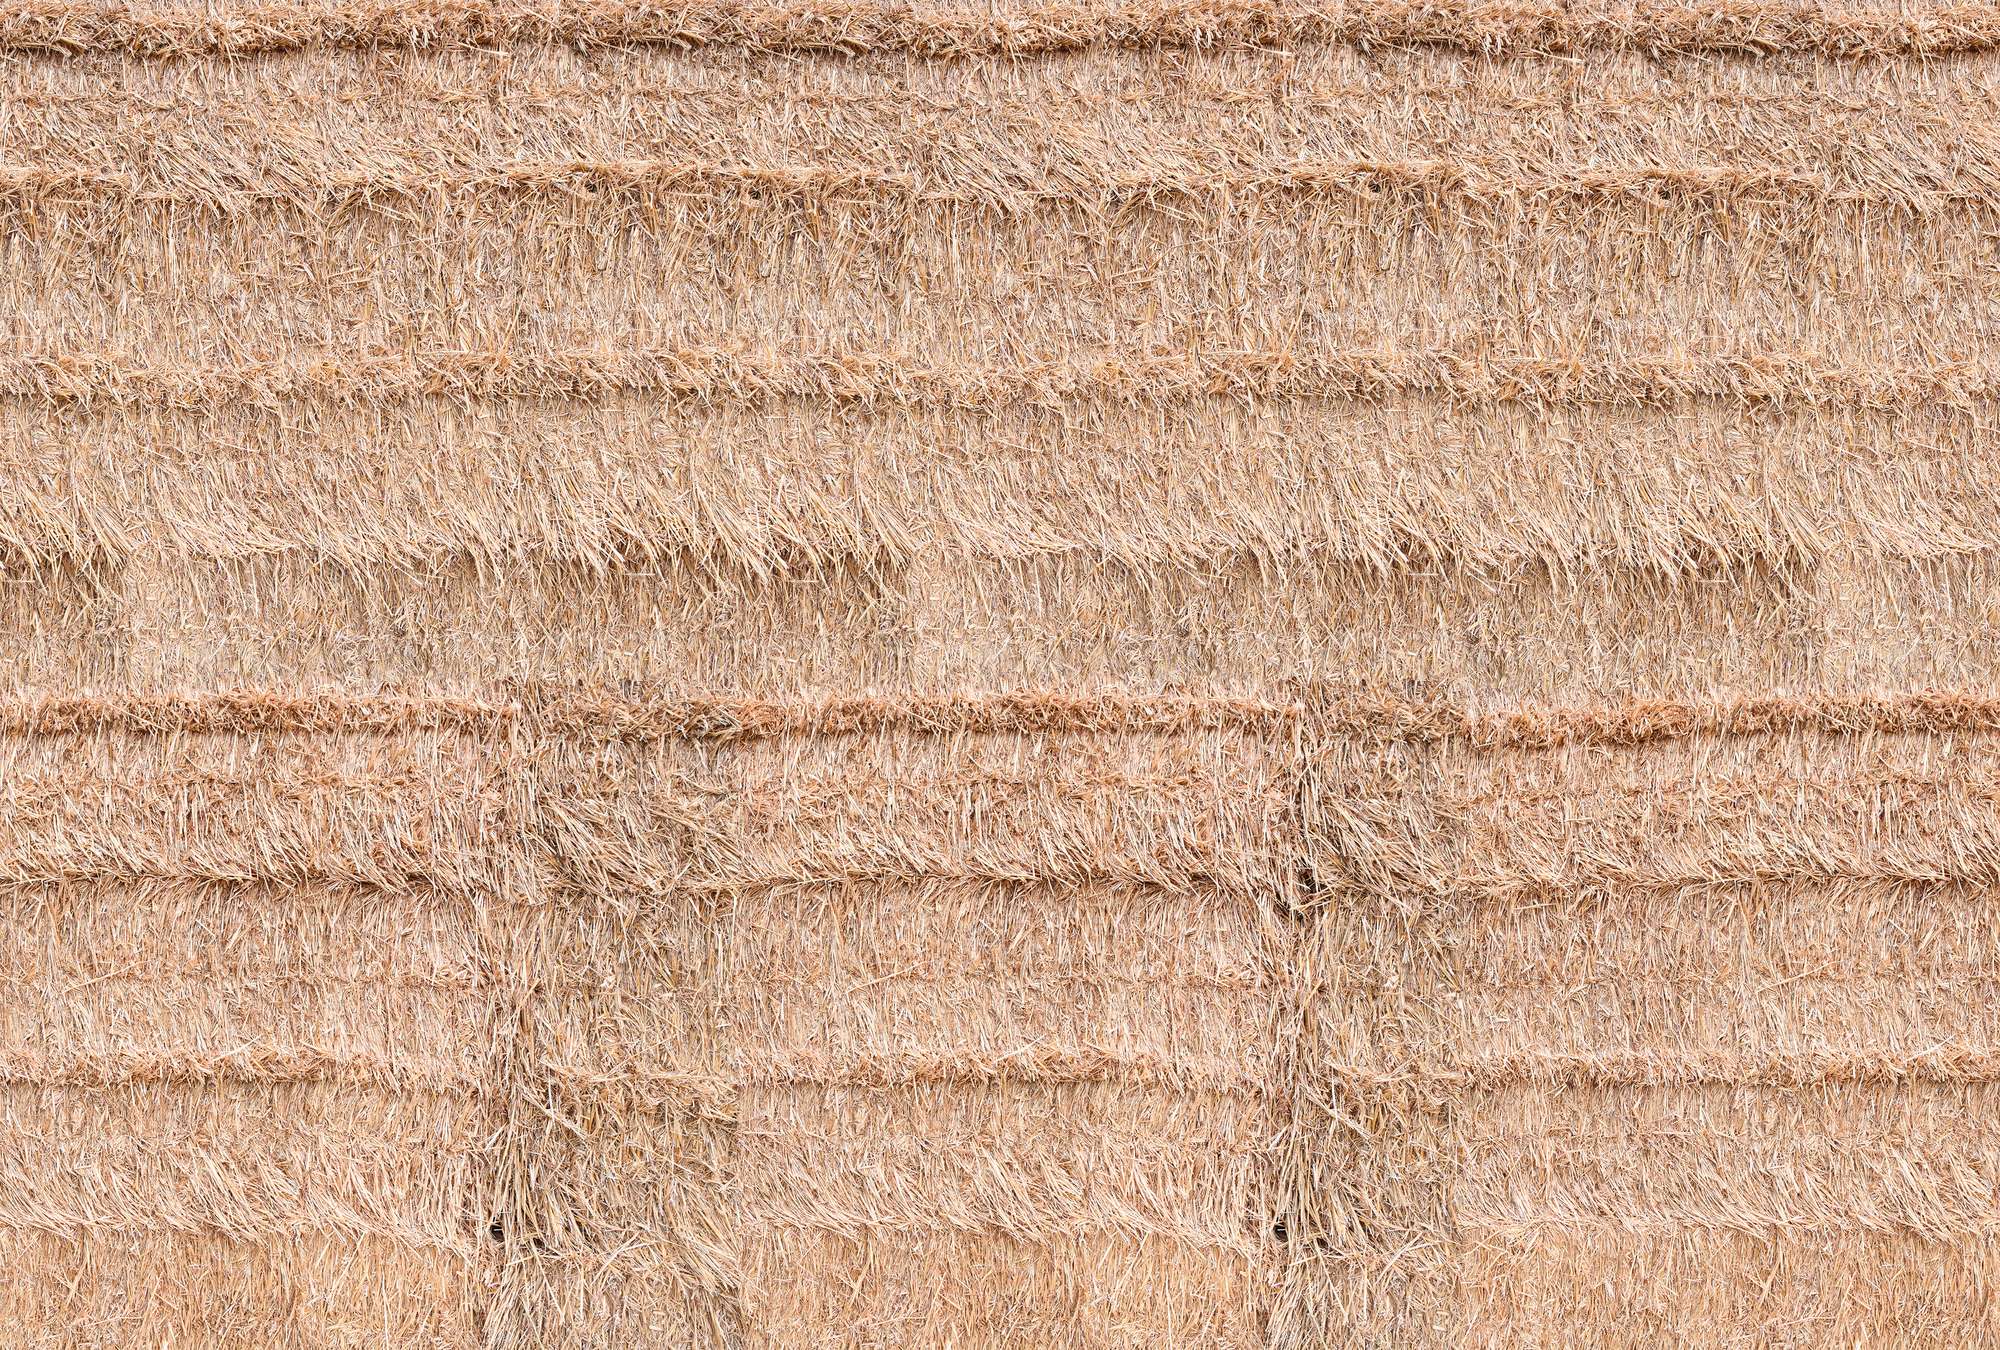             Detail picture of straw bales
        